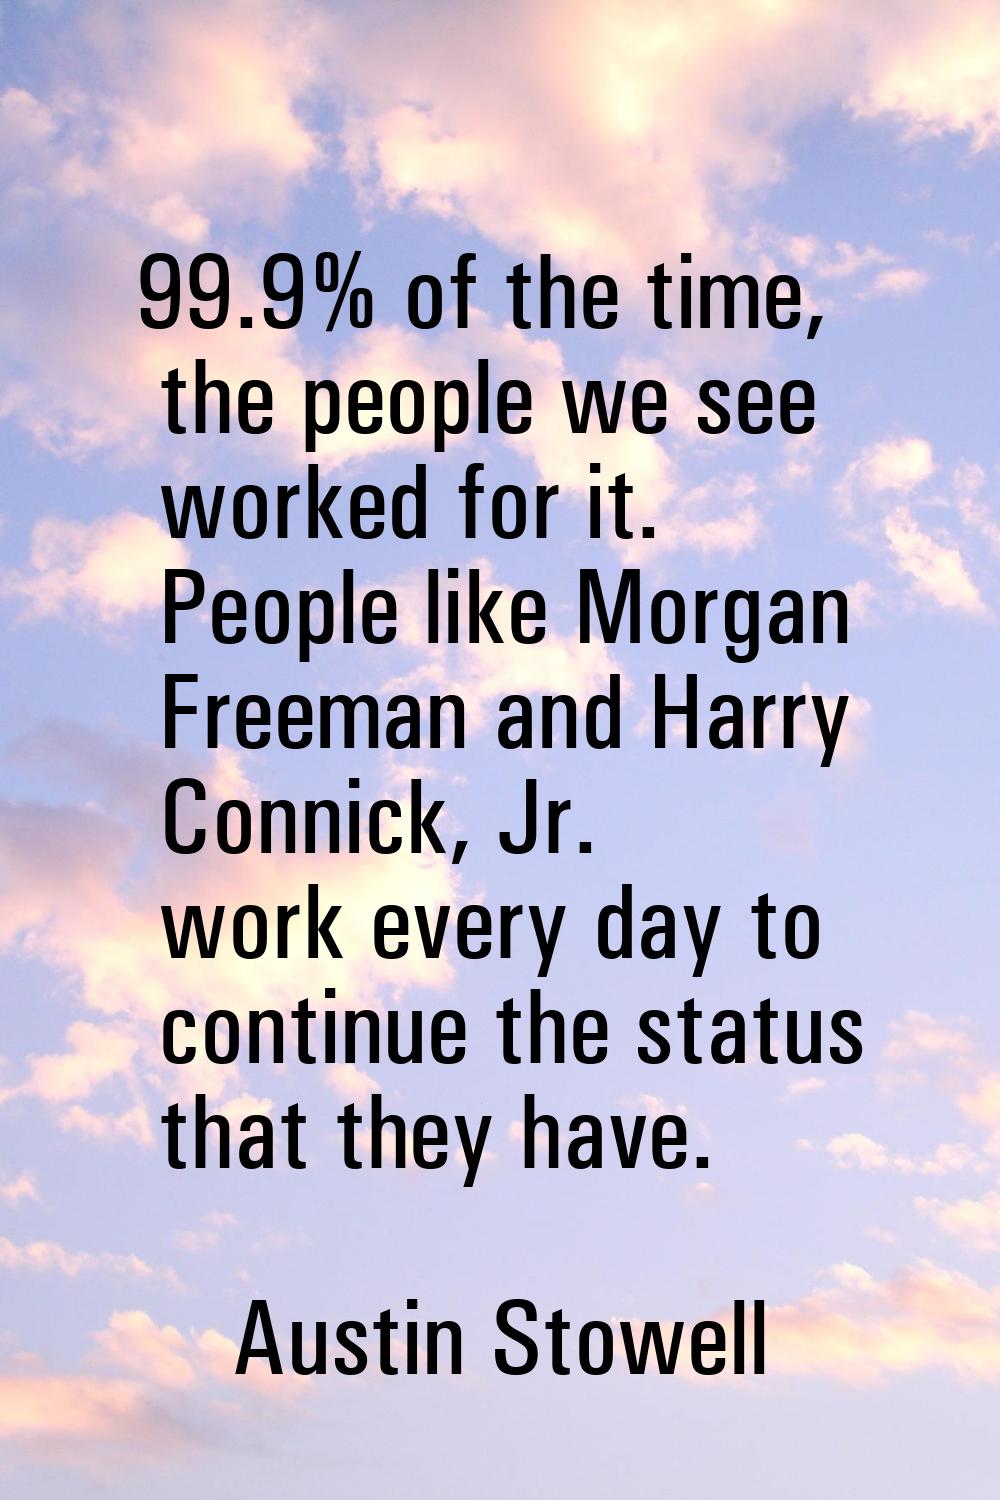 99.9% of the time, the people we see worked for it. People like Morgan Freeman and Harry Connick, J